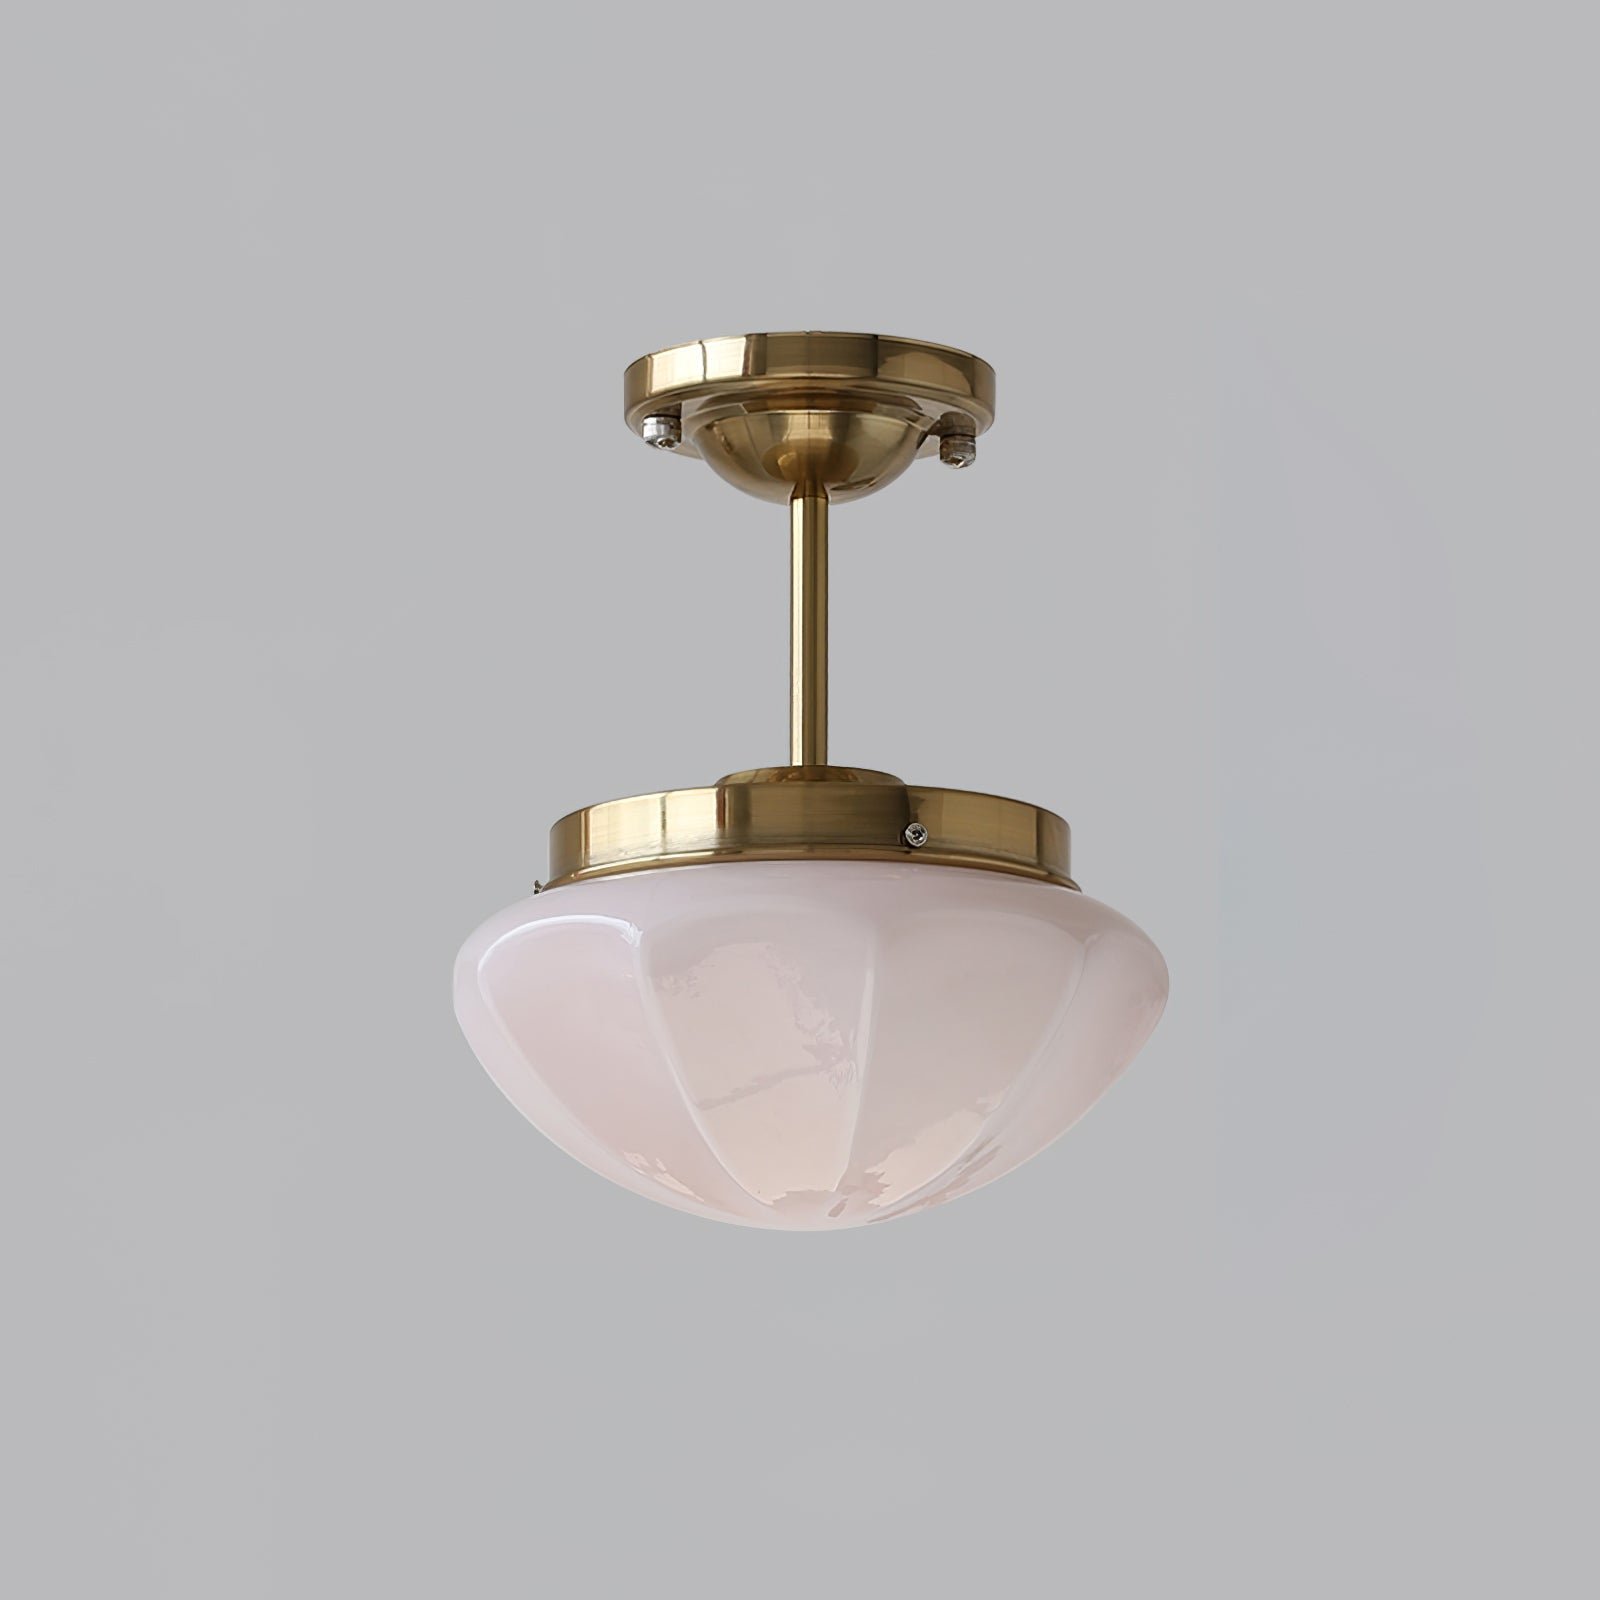 Gold and Pink Marta Mini Pendant Lamp, Diameter 9.8 inches x Height 11.8 inches (25cm x 30cm)